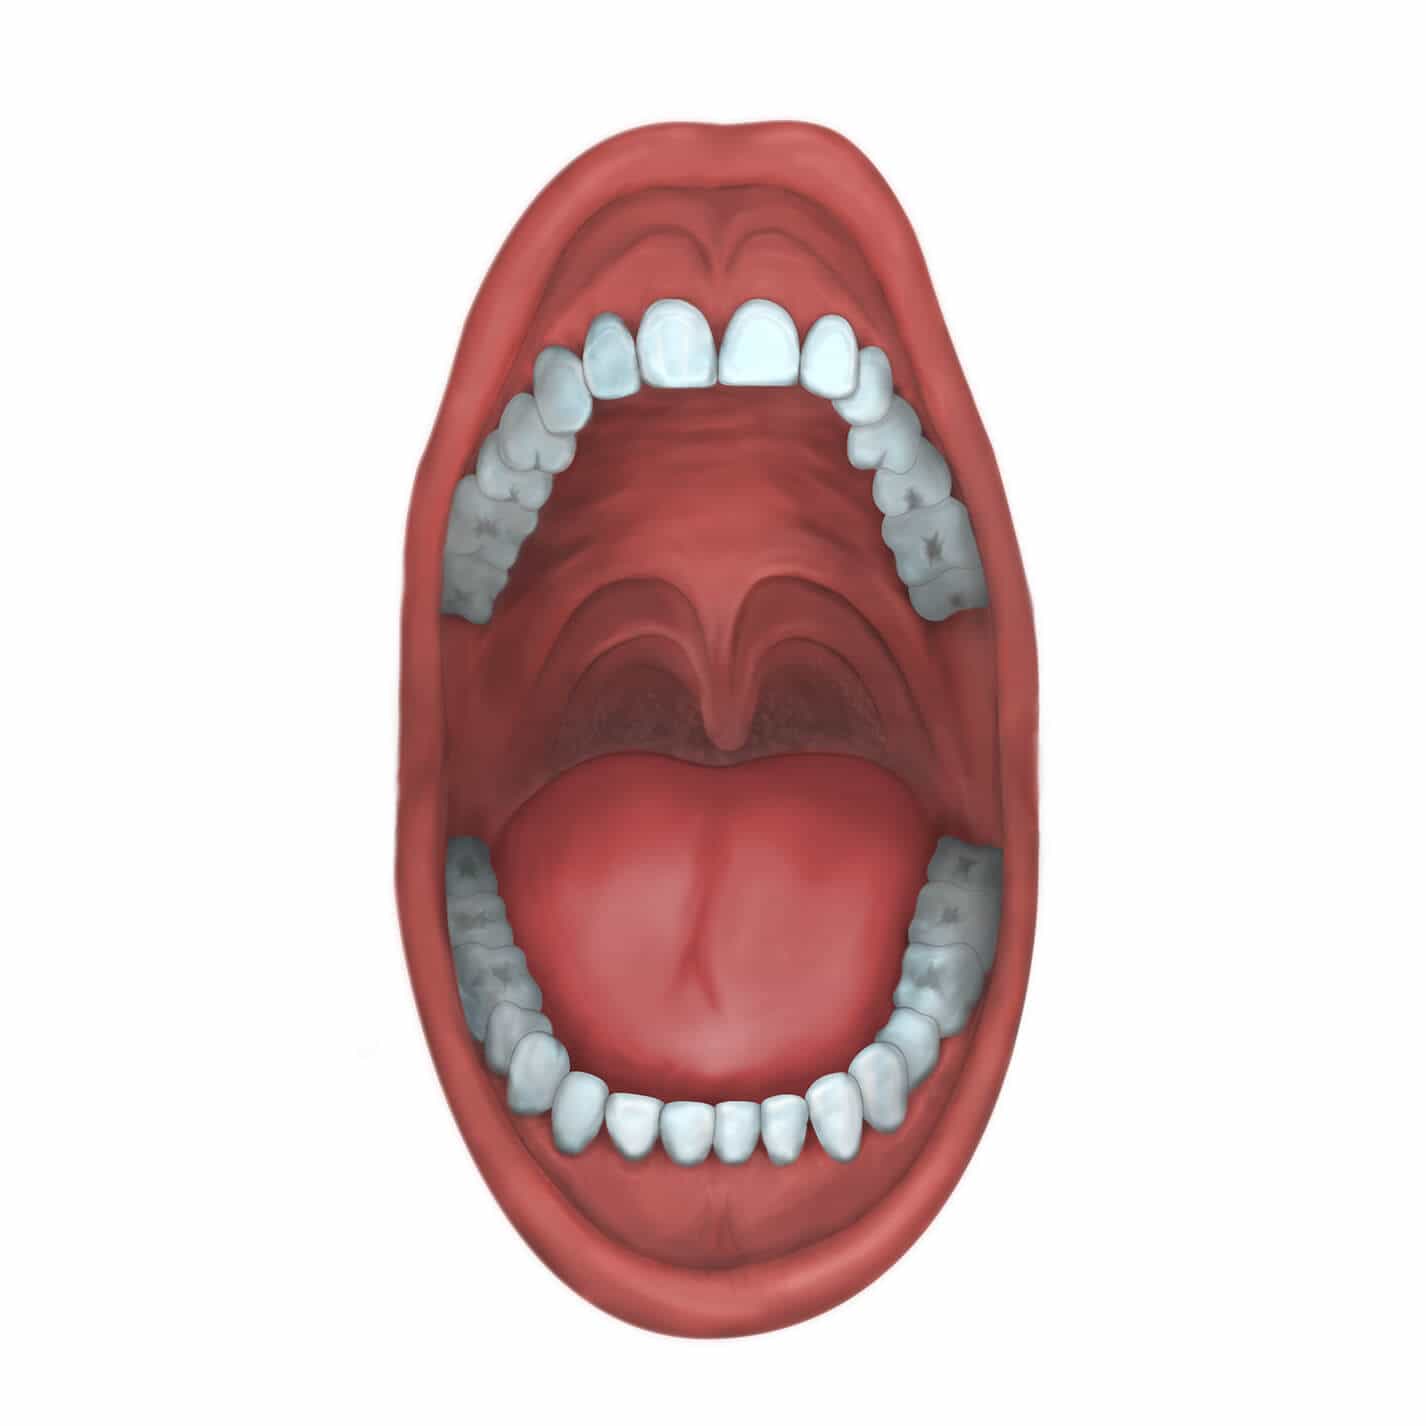 WebMD Illustrations - Mouth